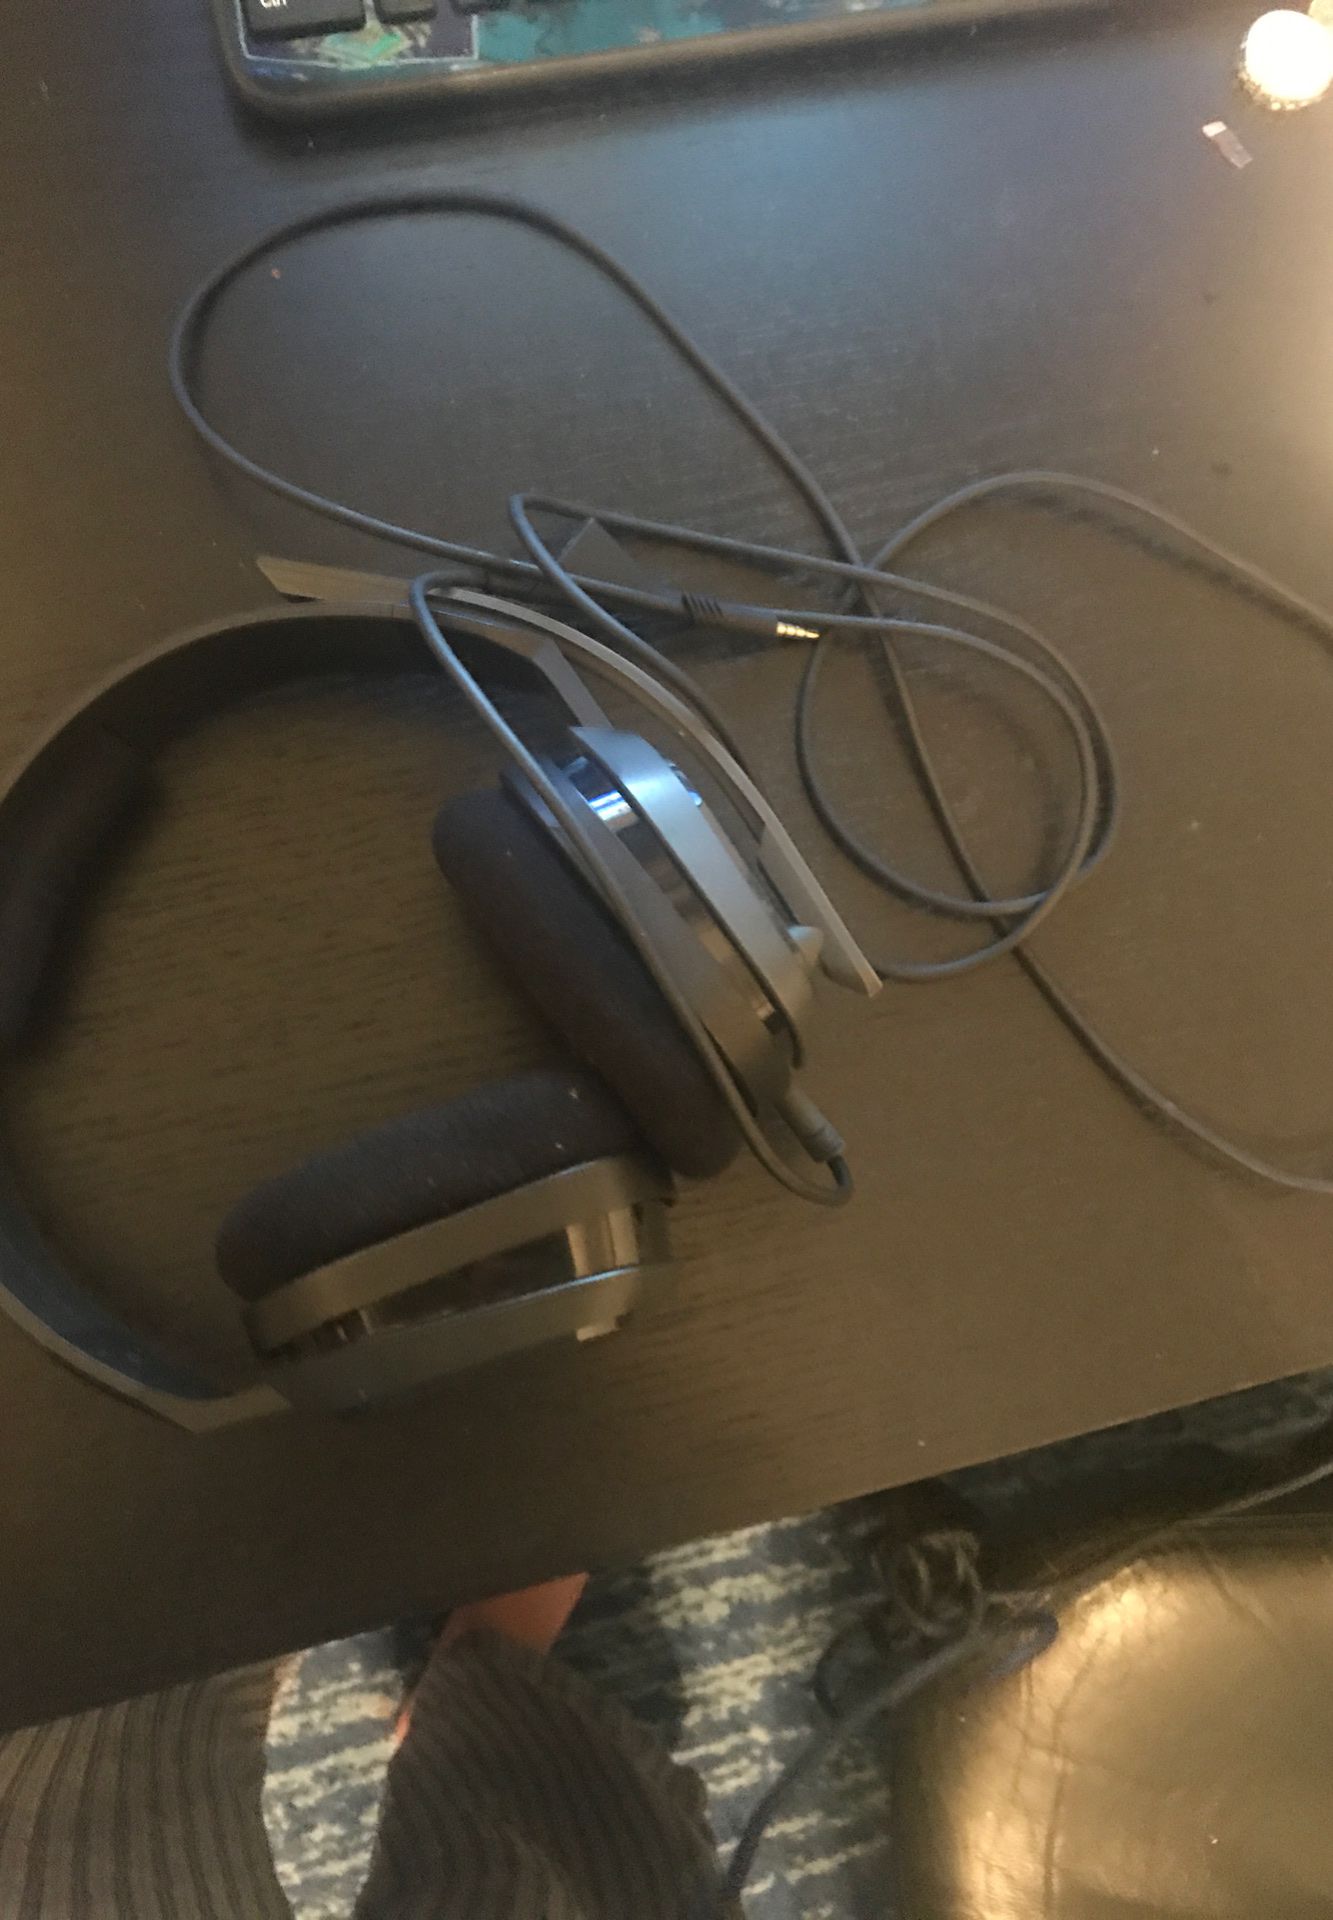 Astro A10 headset